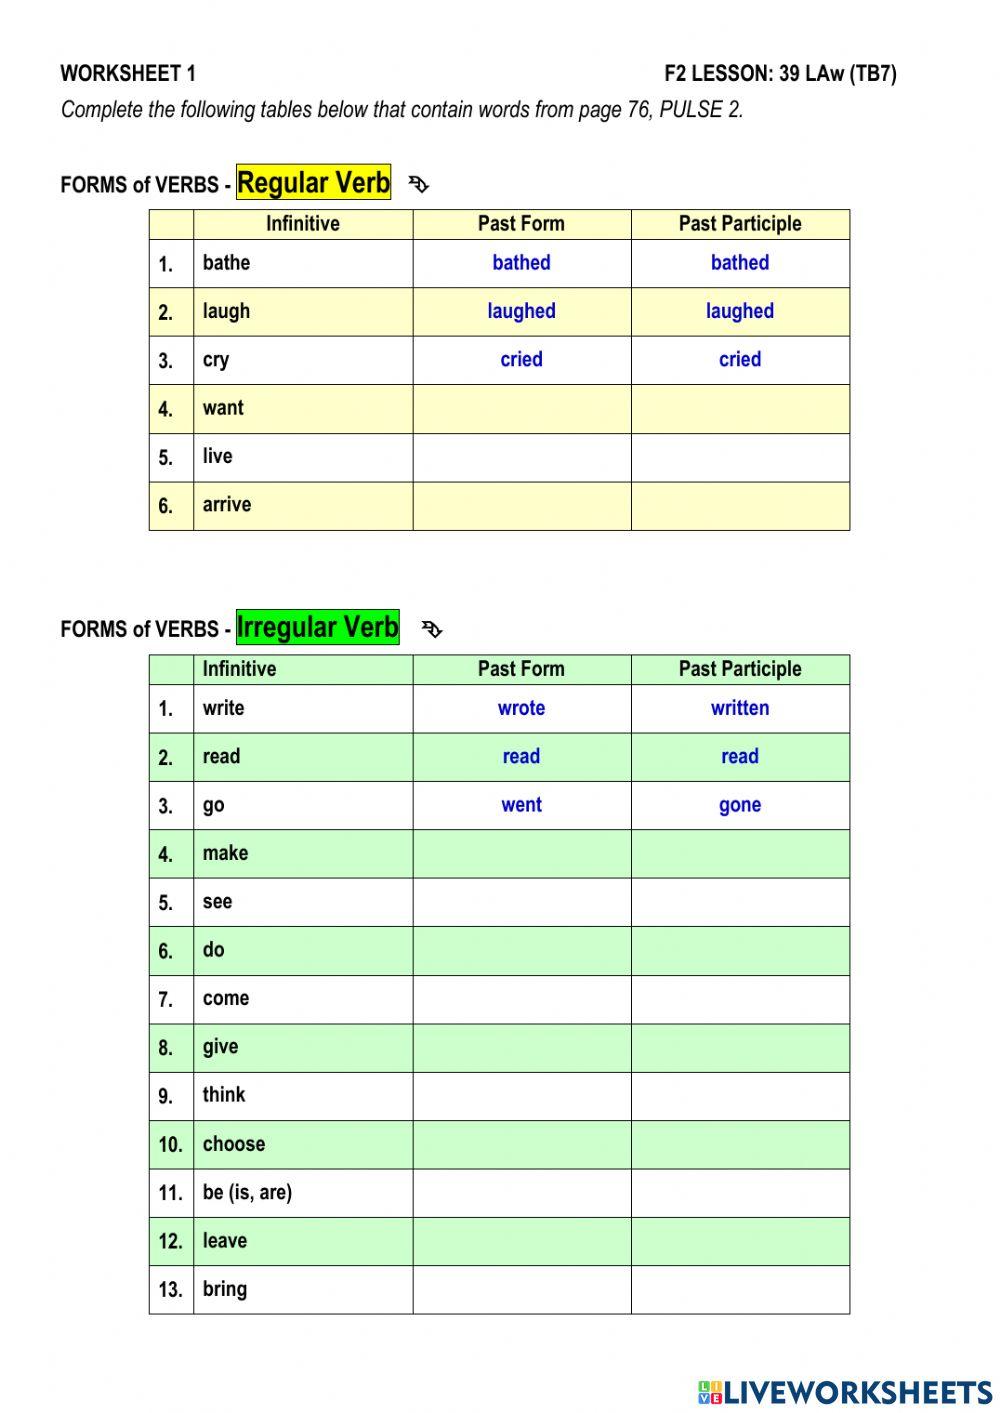 PULSE 2 UNIT 7 page 76 - Forms of Verbs